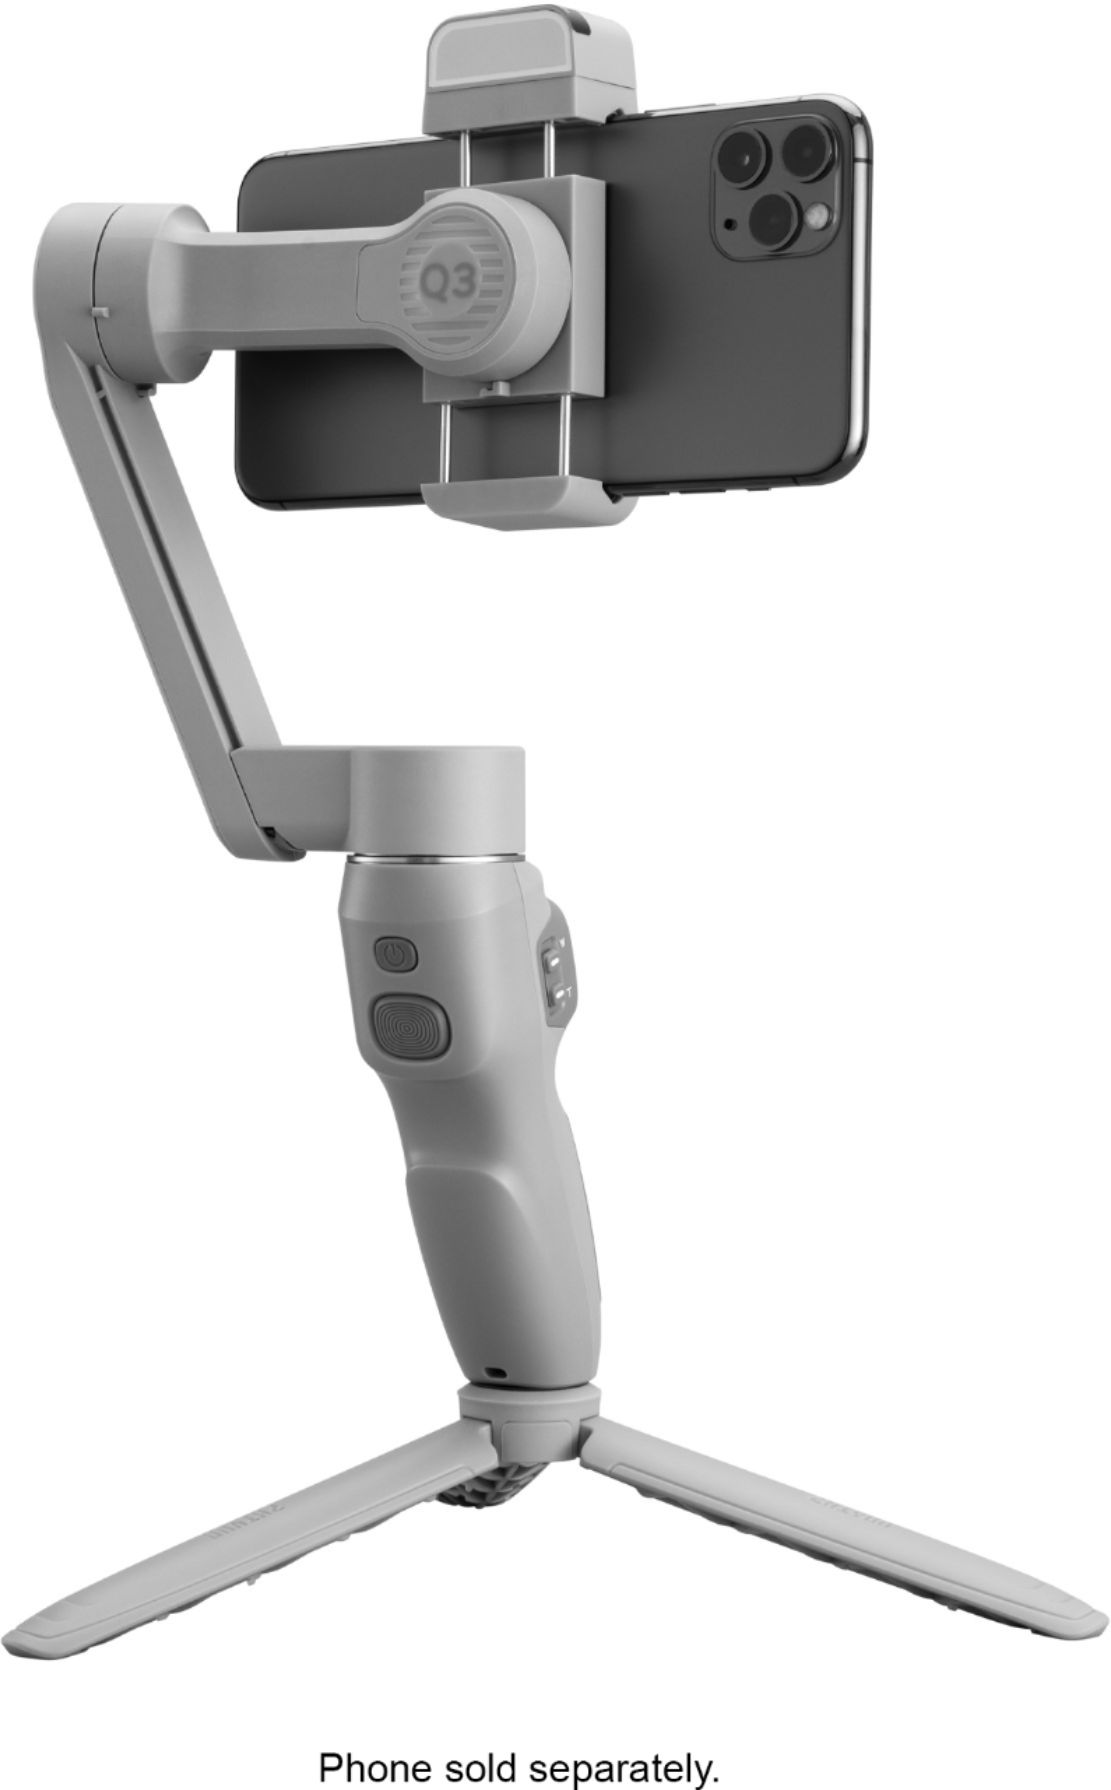 Angle View: Zhiyun - Smooth Q3 Folding 3-Axis Gimbal Stabilizer for Smartphones with Built-in LED Video Light and Detachable Tri-pod Stand - Gray